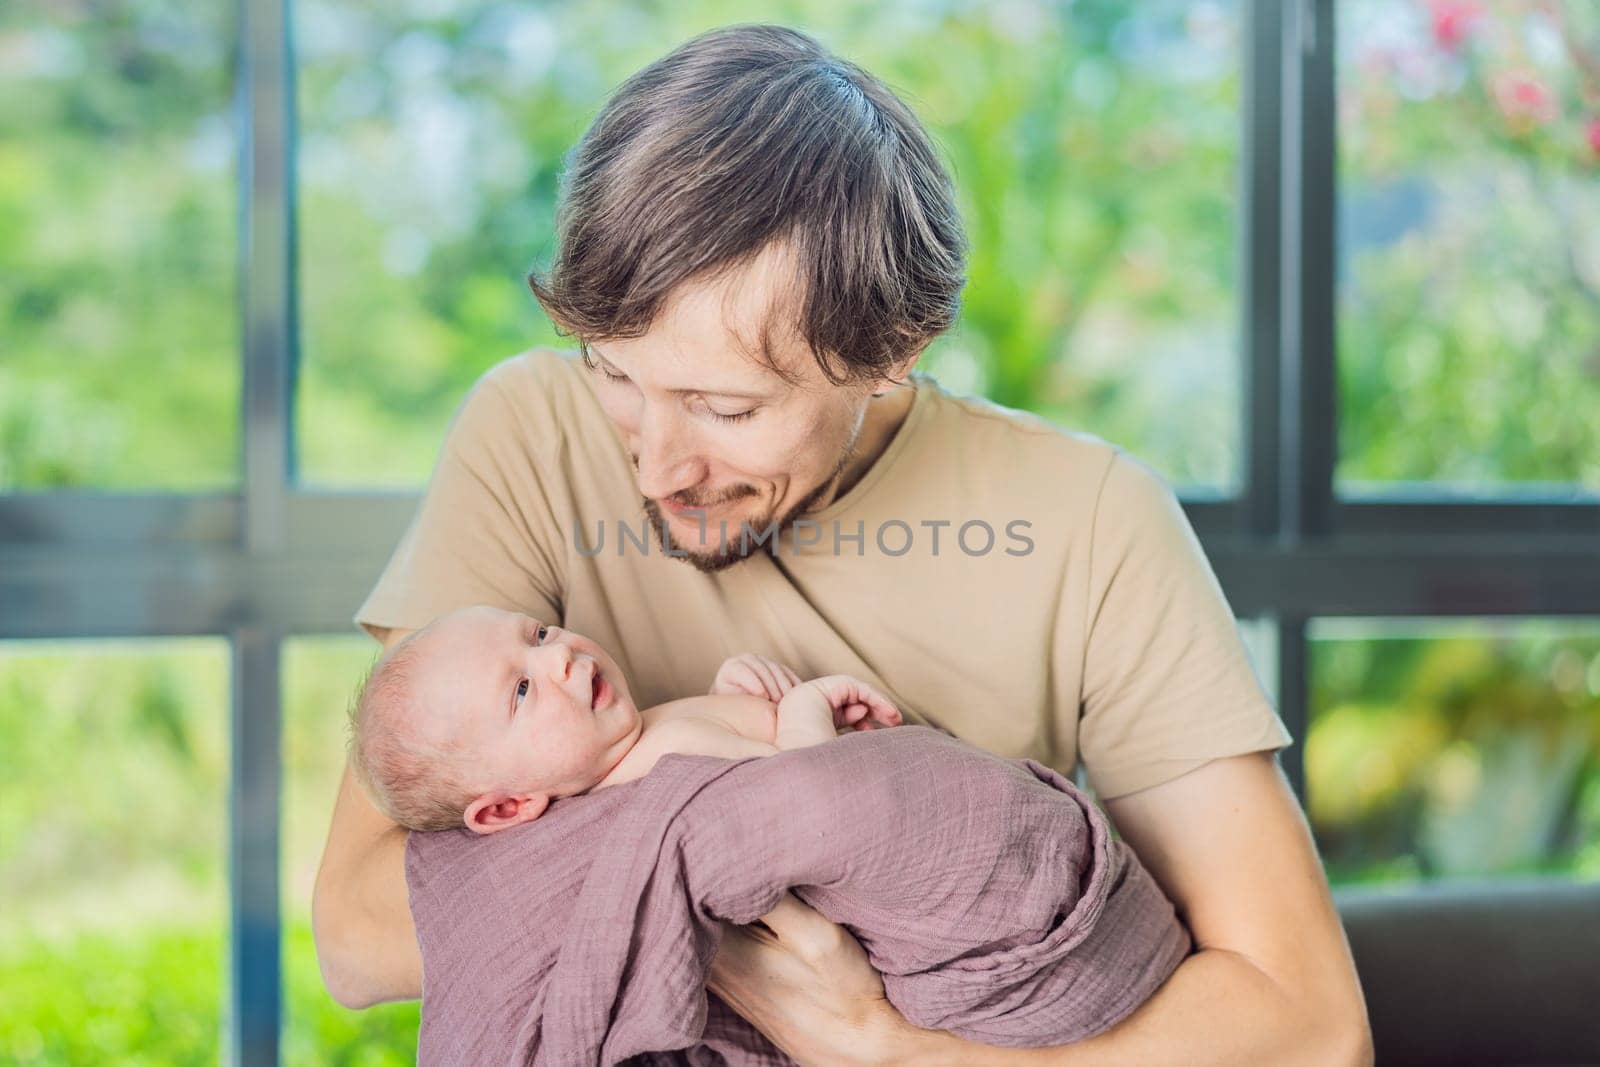 Dad and newborn at home. This tender moment captures the bond between father and child in a loving and comfortable family environment highlighting the joys of parenthood and the warmth of home by galitskaya